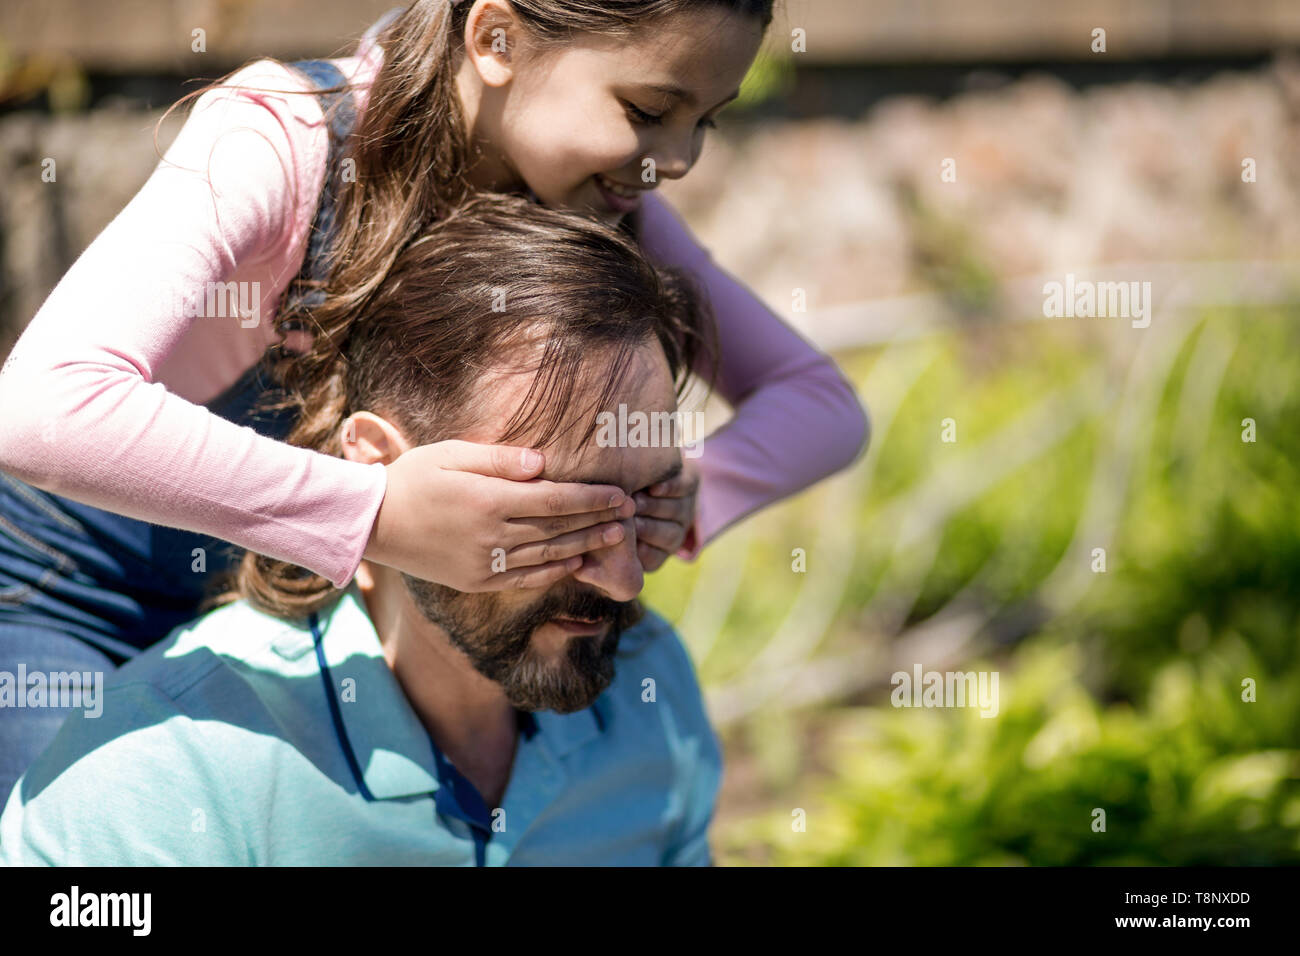 The Girl Is Closeing Her Dad's Eyes With Her Hands Outdoors. Stock Photo